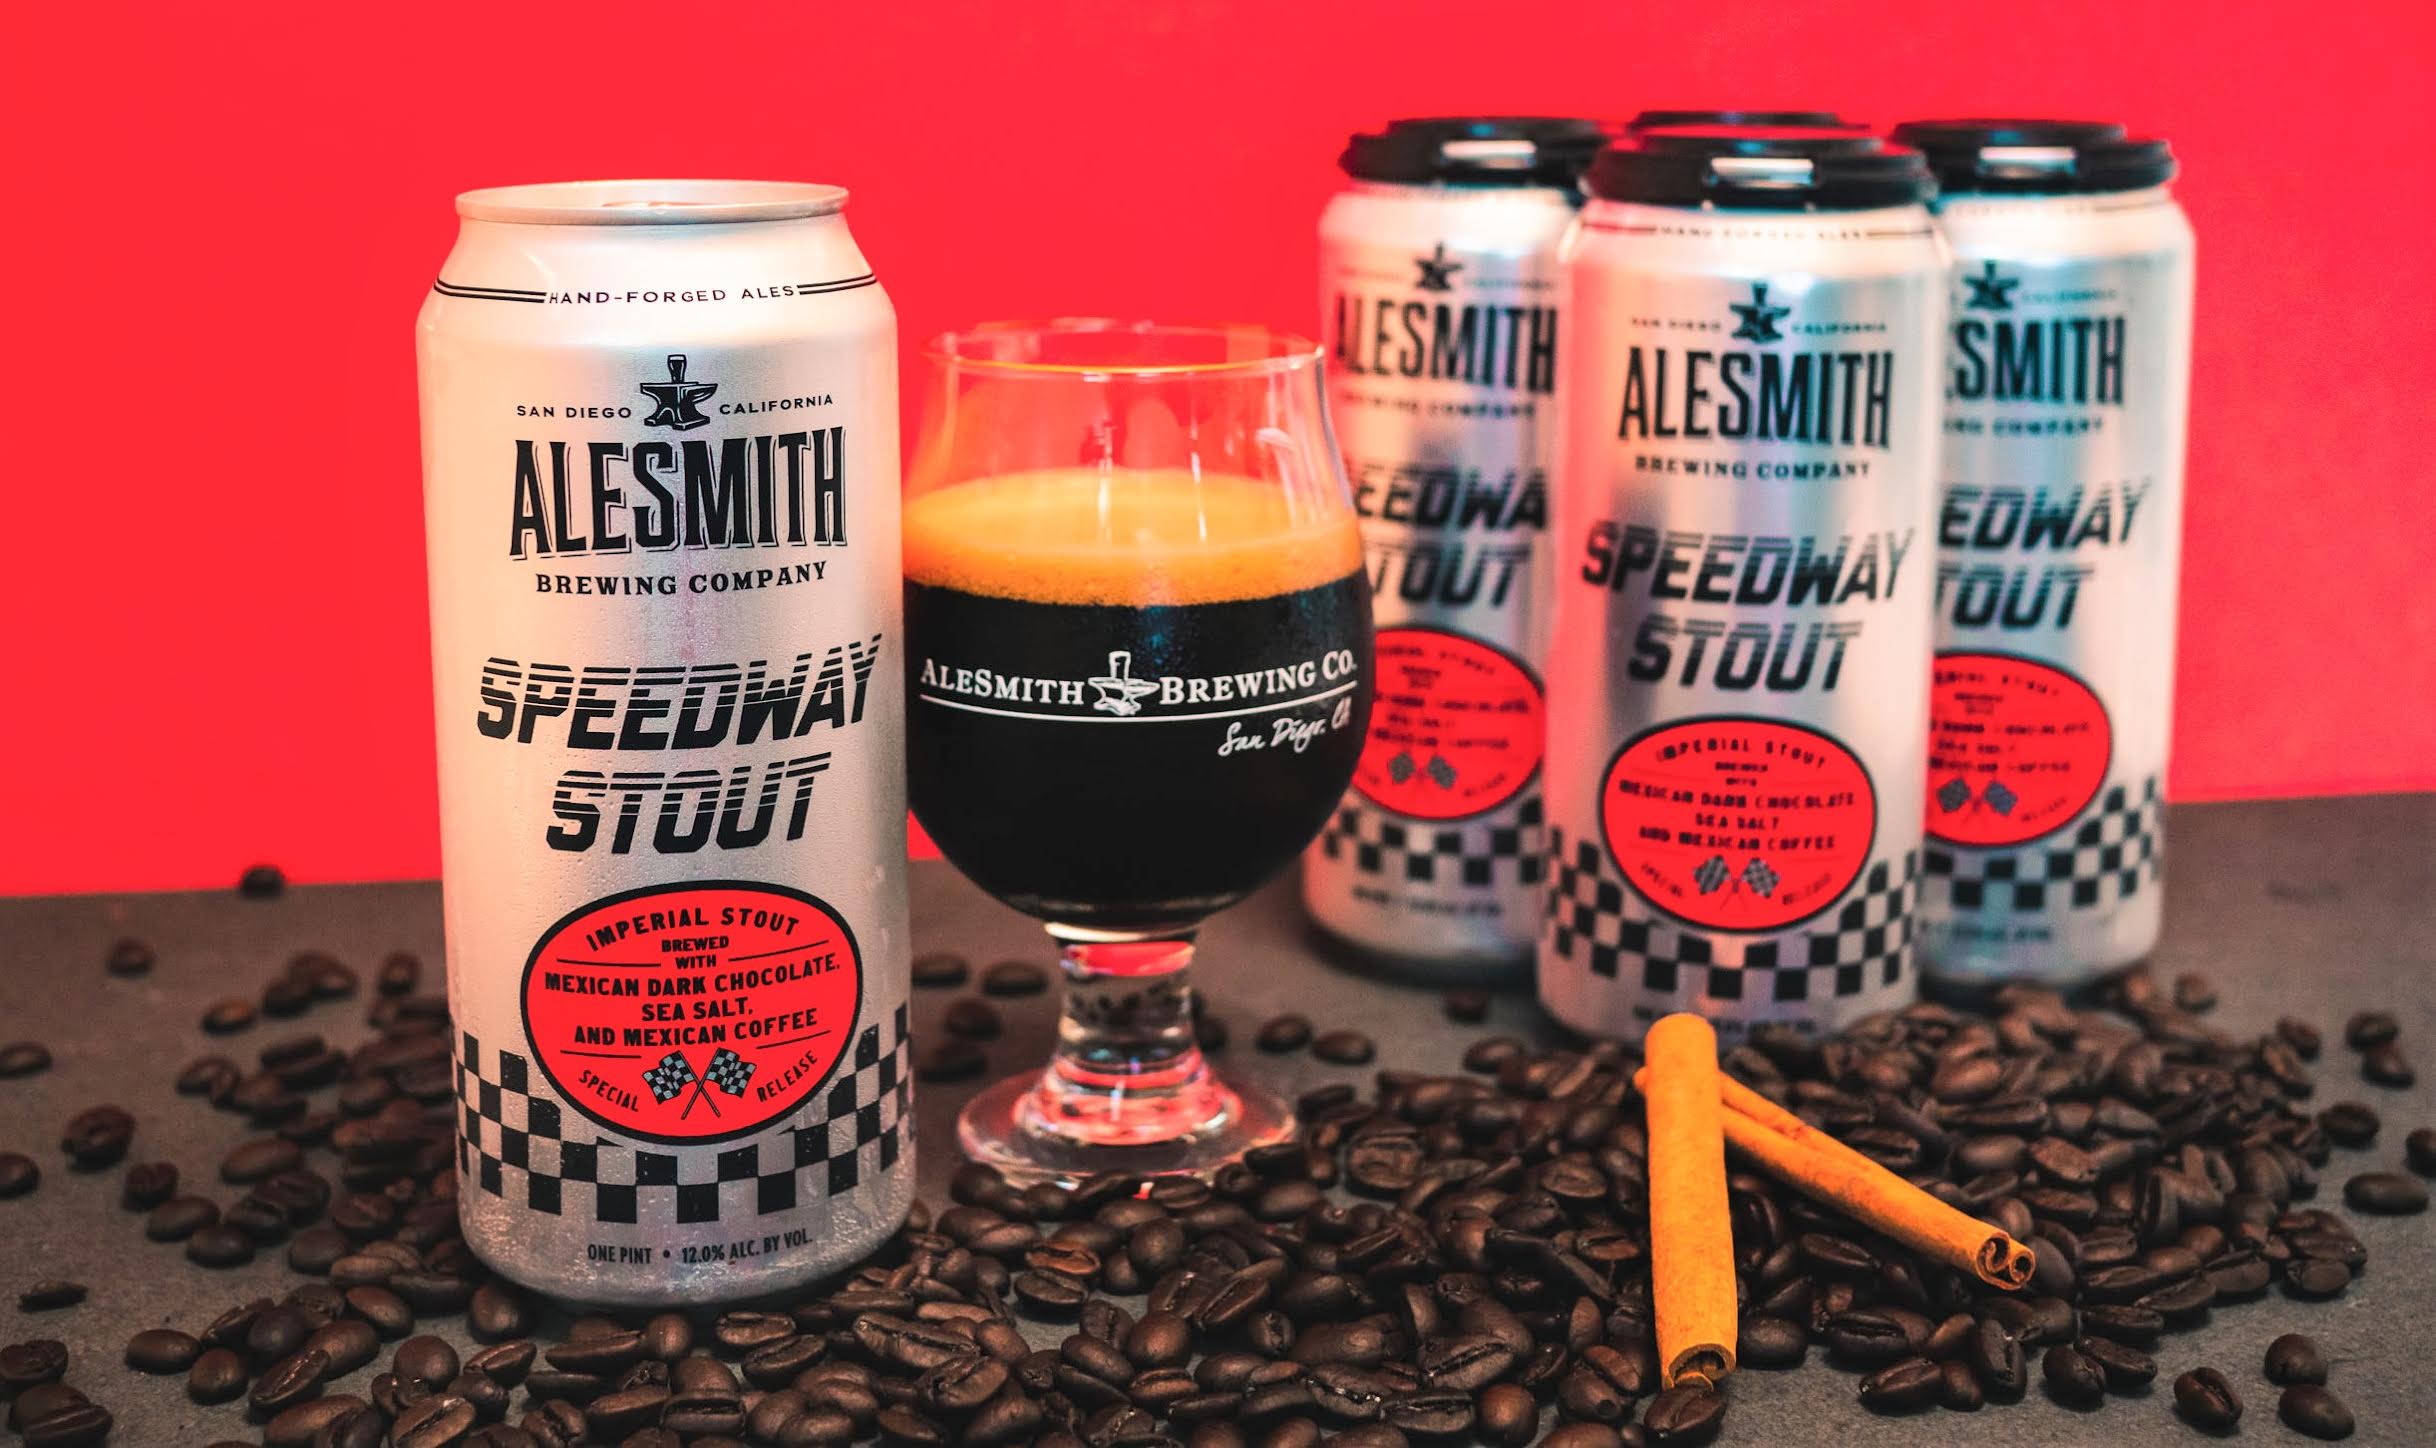 image of Speedway Stout Variant #3: Mexican Dark Chocolate, Sea Salt and Mexican Coffee courtesy of AleSmith Brewing